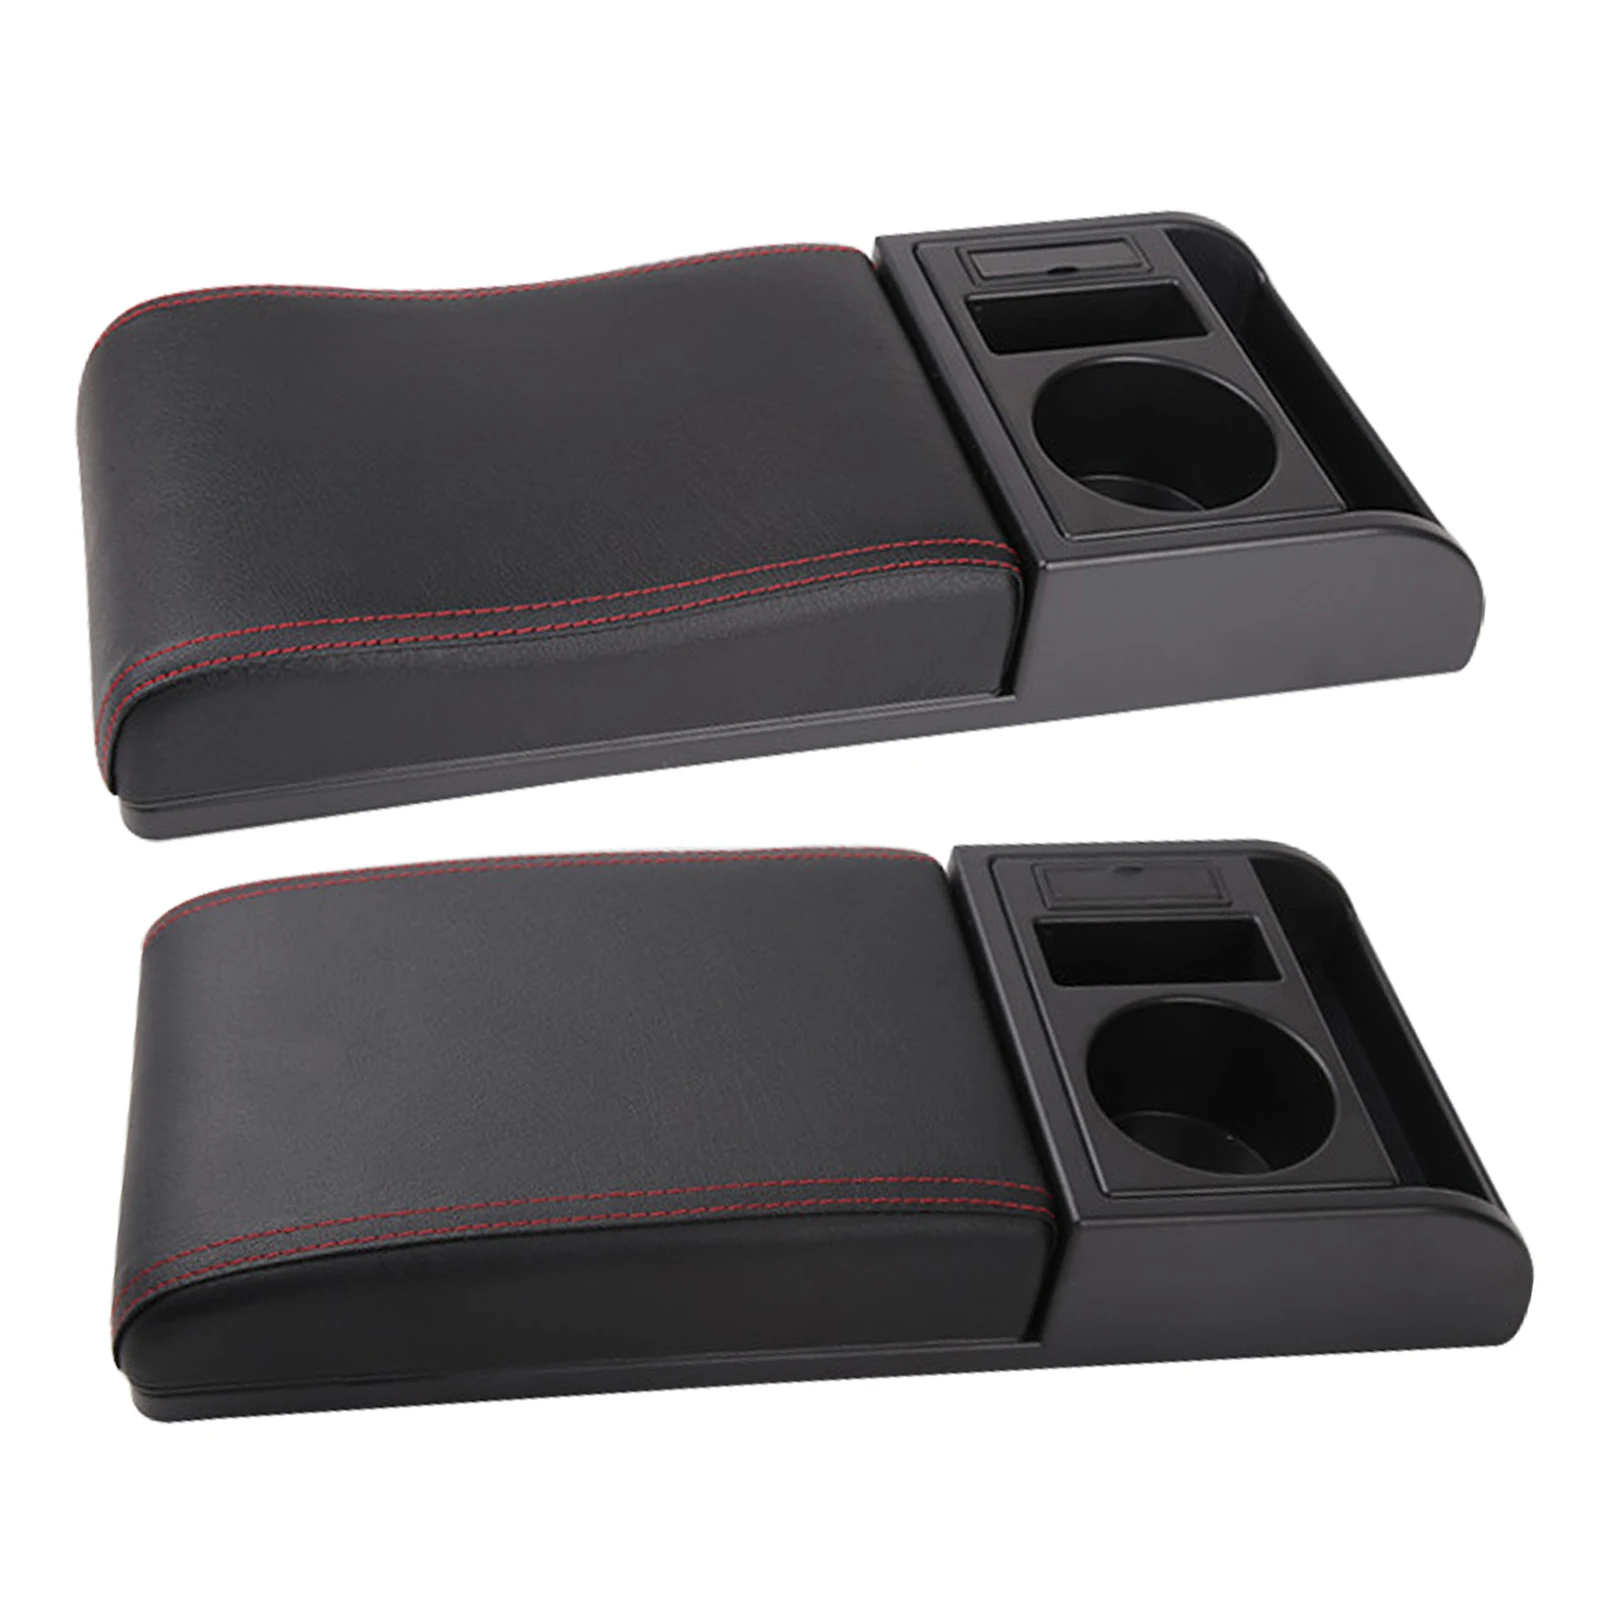 

Car Armrest Box Cushion Storage Auto Heightened Pad Central Arm Rest Seat Cover Multifuntion Car-styling Automobile Interior New